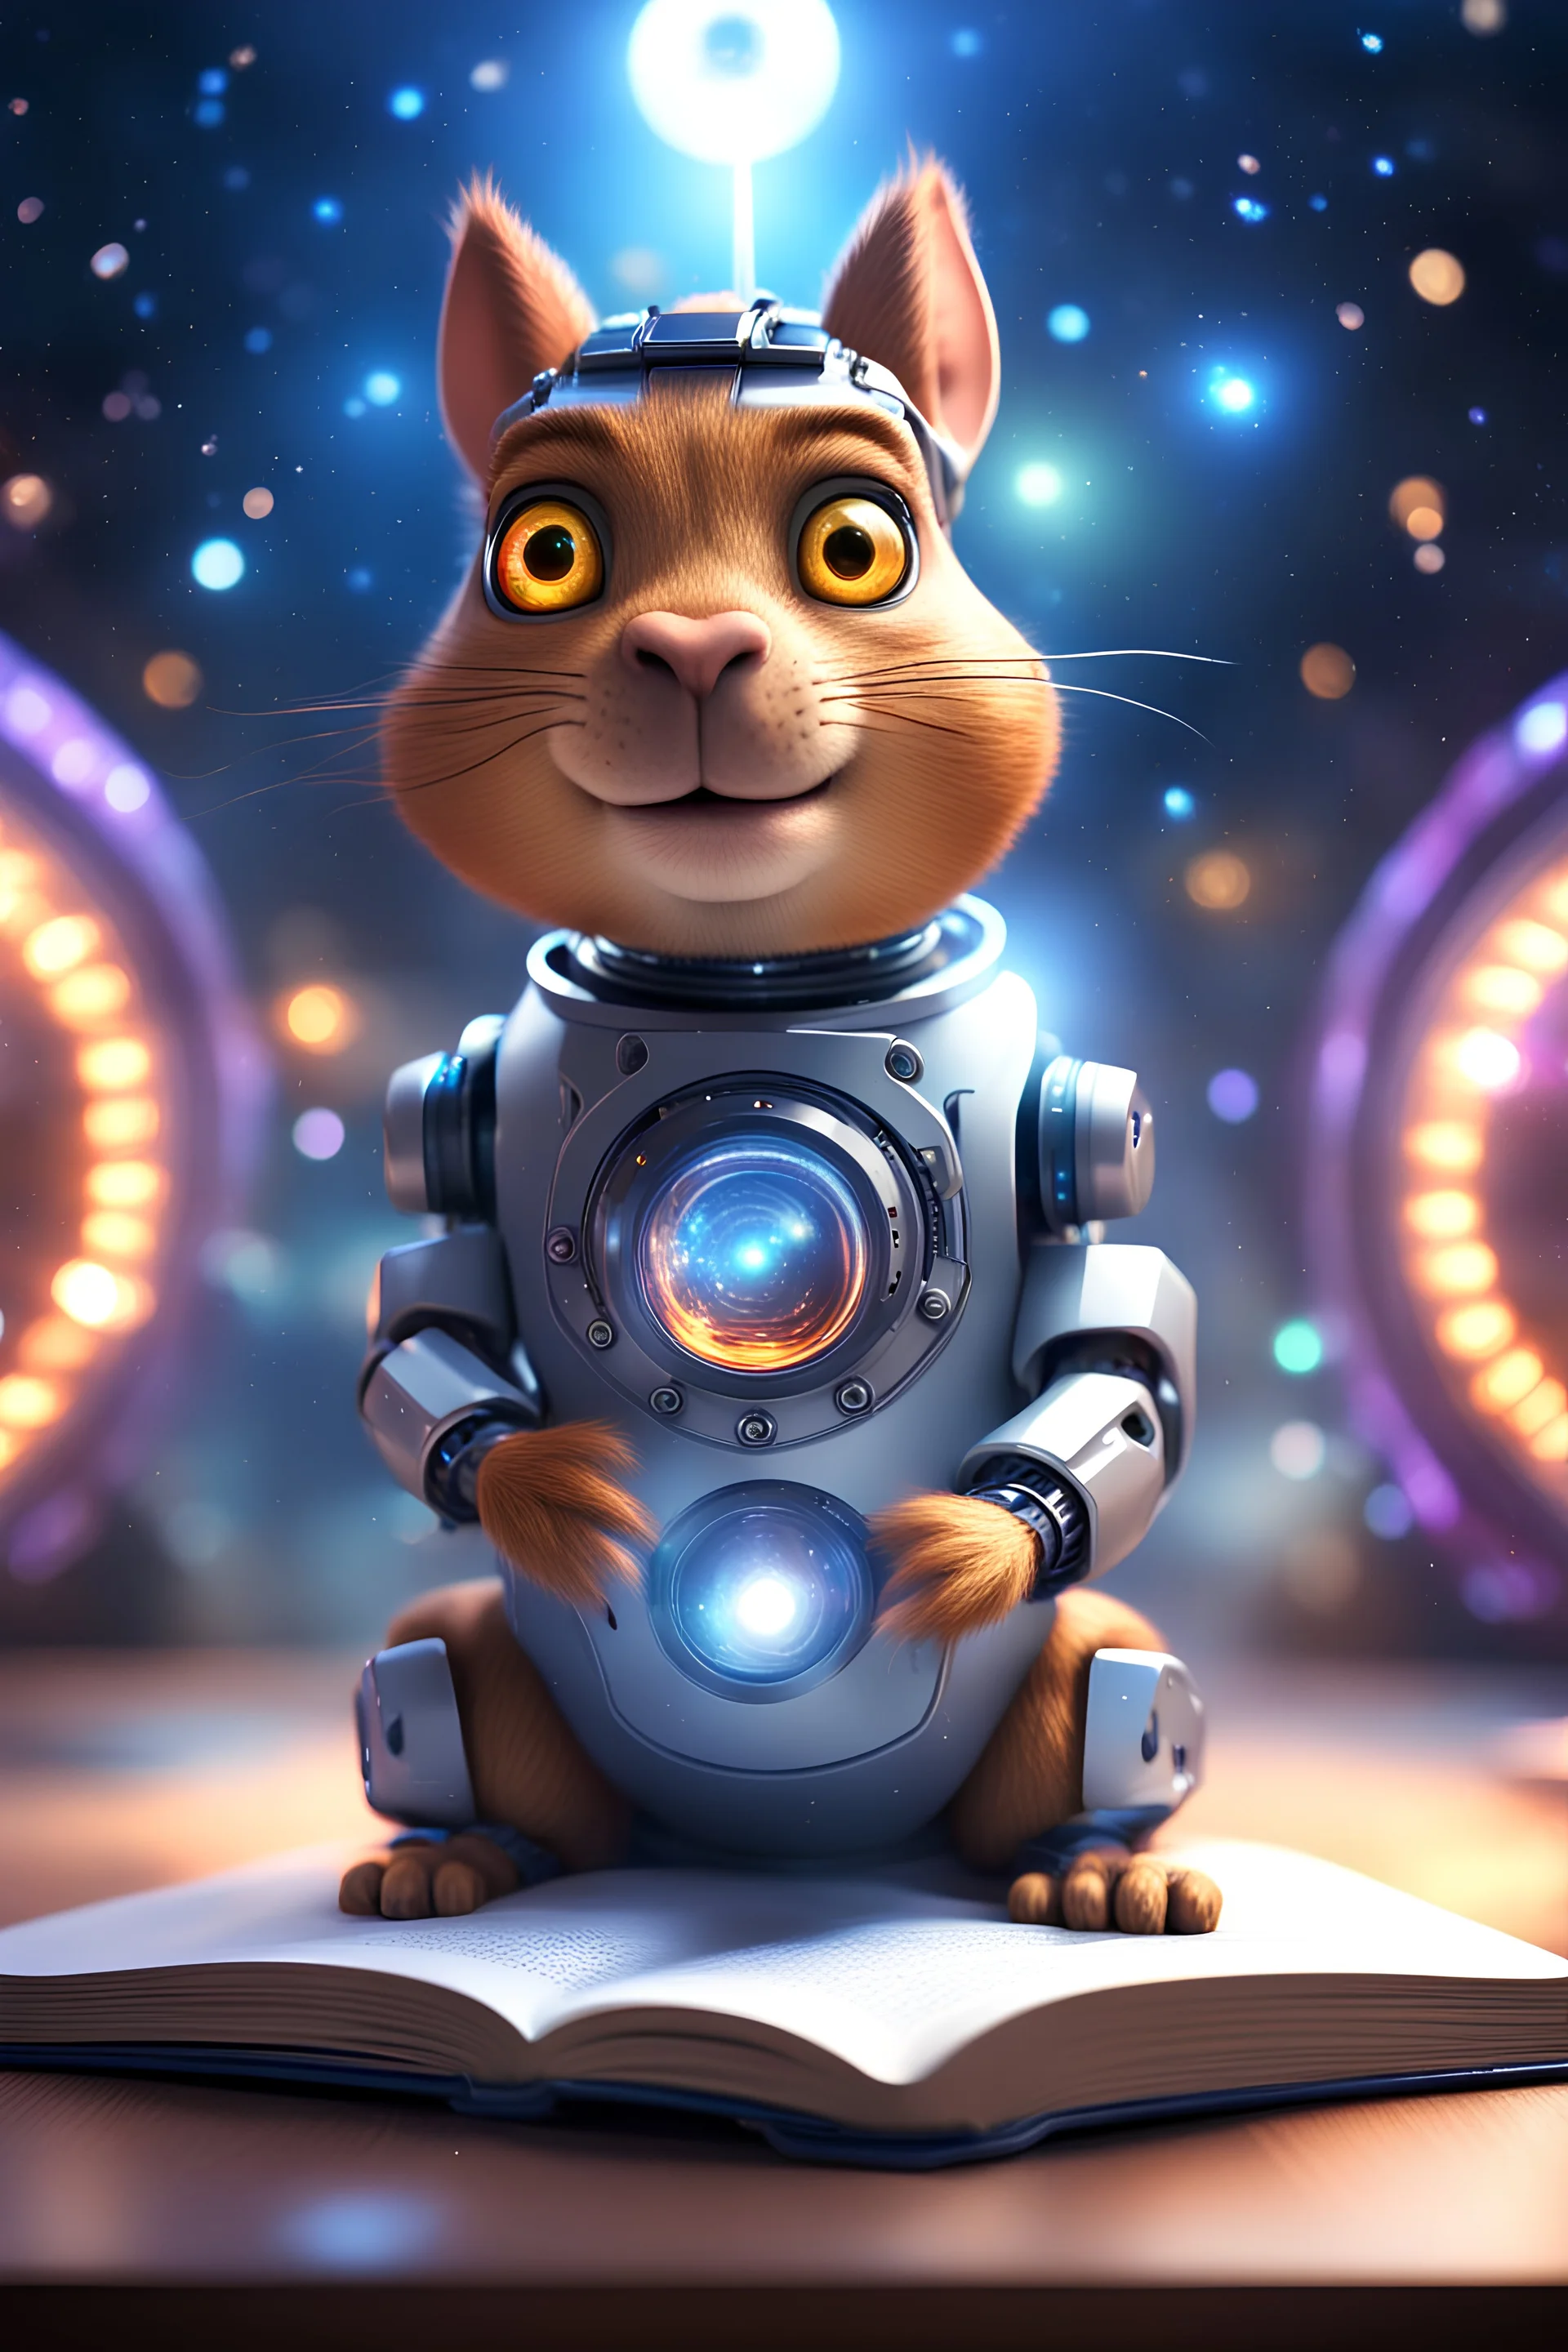 Robot hypnosis survivor at 1hit.no,book cover illustration, portrait of ultimate transcendent happy chat squirrel gremlin cat space hippo horse with spotlights, in front of space portal dimensional glittering device, bokeh like f/0.8, tilt-shift lens 8k, high detail, smooth render, down-light, unreal engine, prize winning